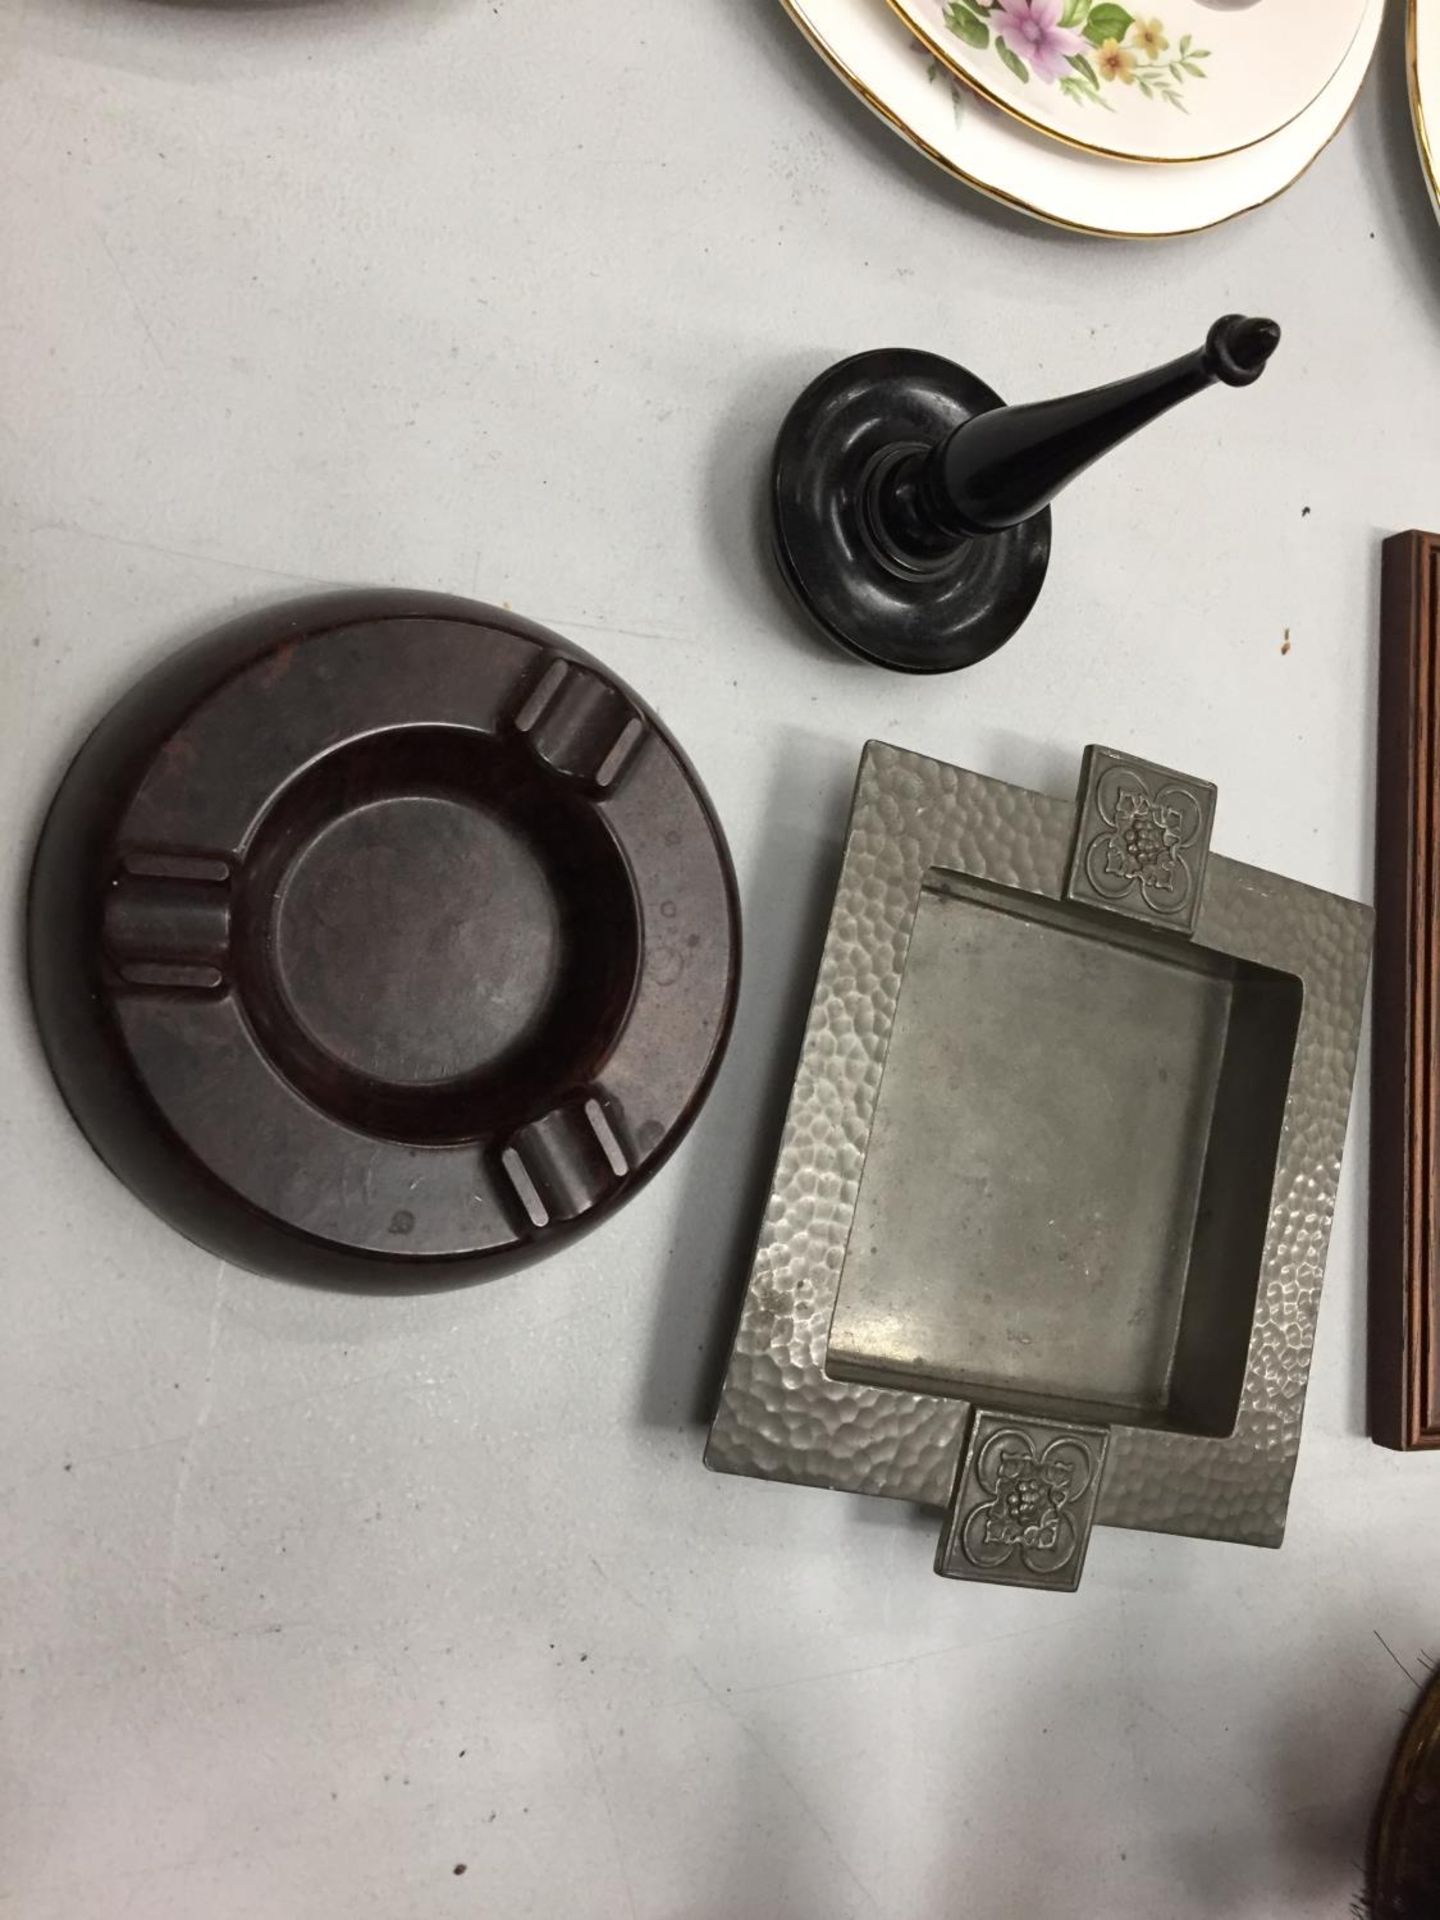 TWO ASH TRAYS AND A RING HOLDER, ONE ASH TRAY IS PEWTER - Image 2 of 2